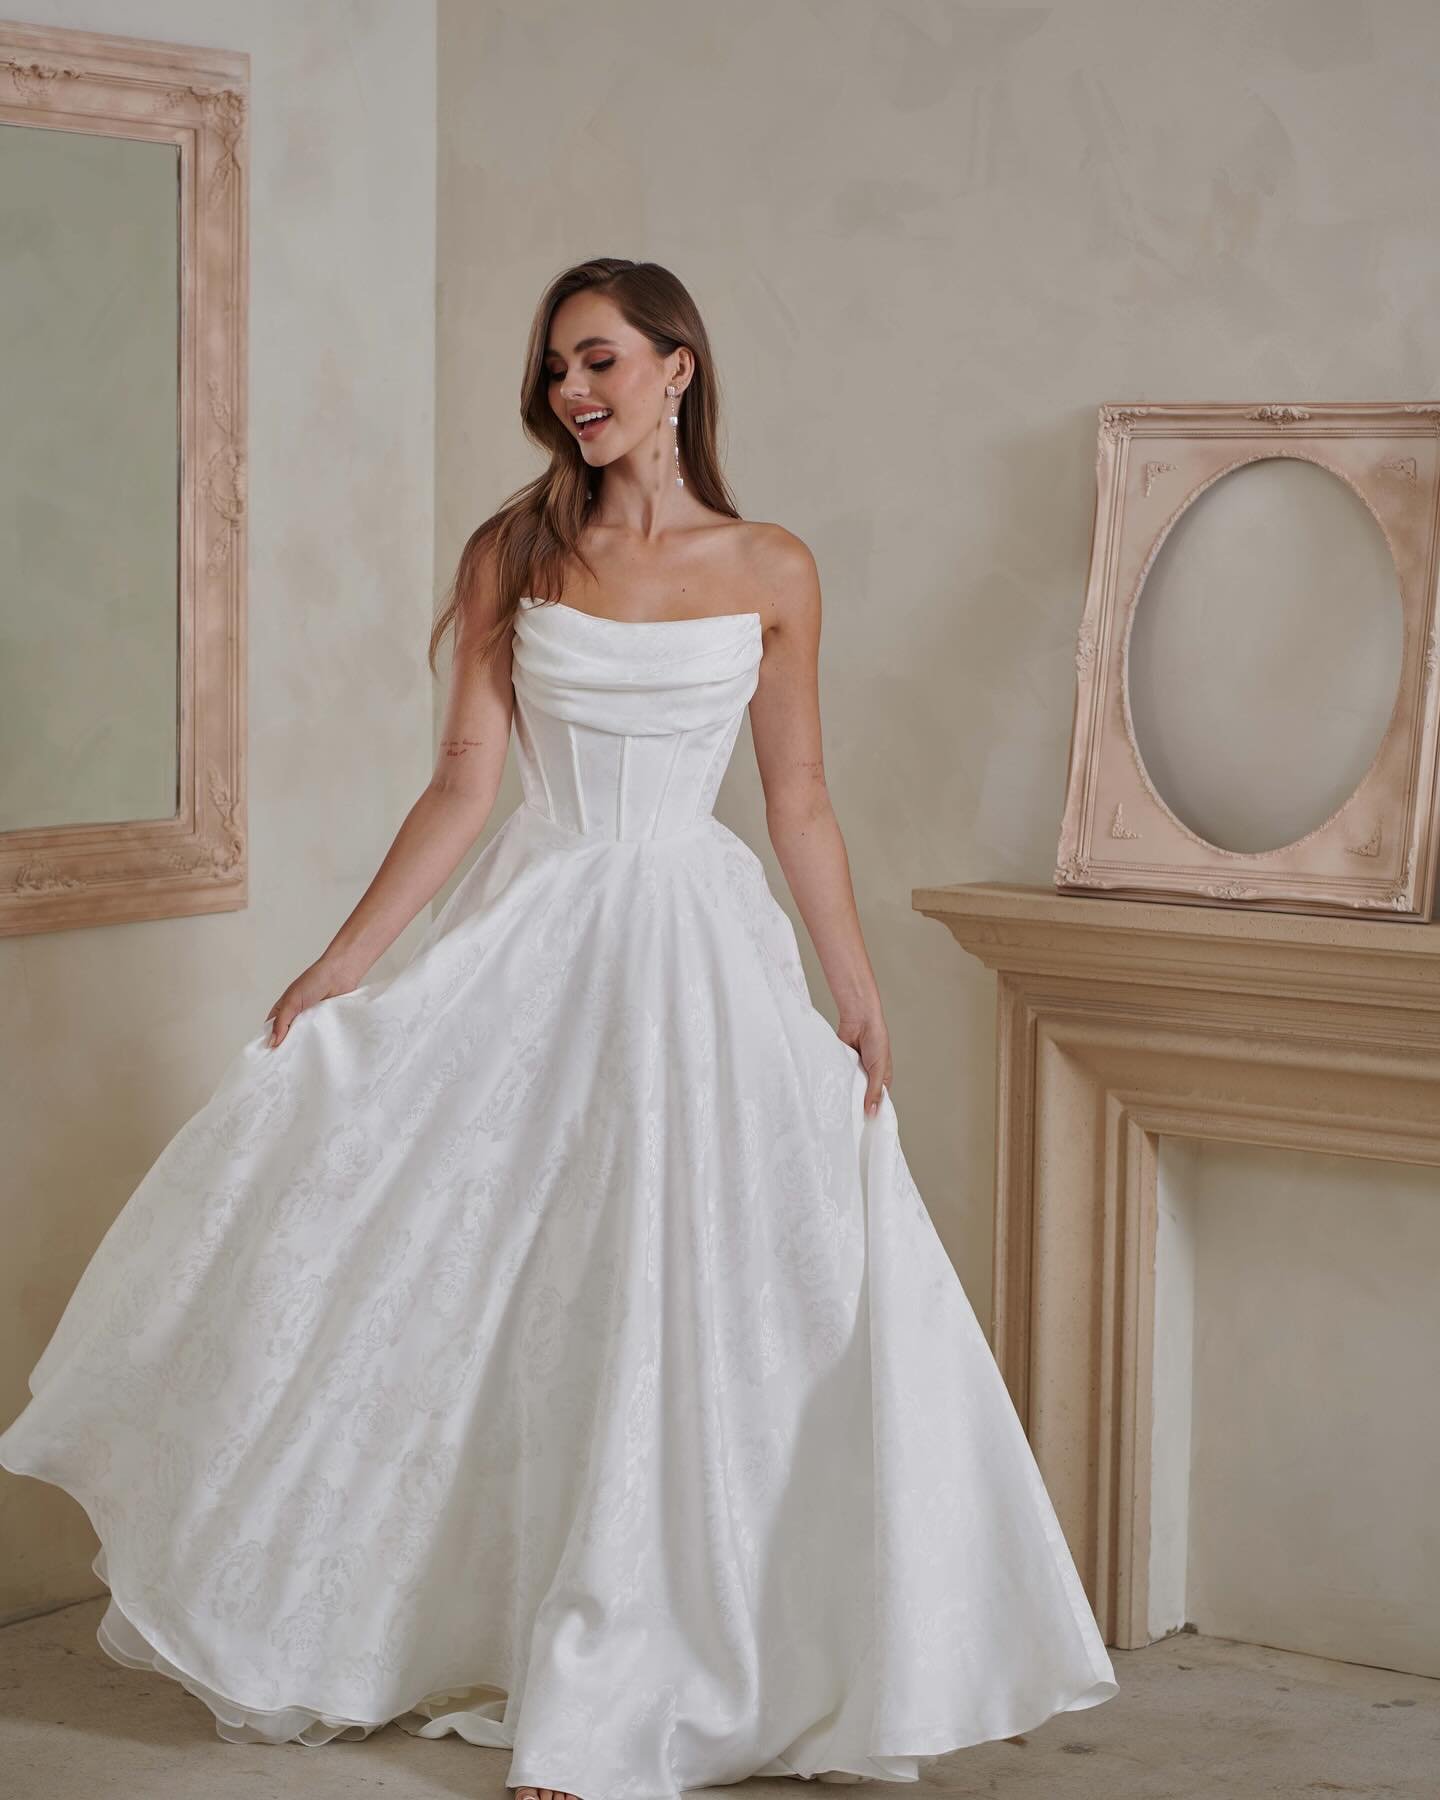 A favorite of mine, &lsquo;Greer&rsquo; by @serenebymadilane is an embodiment of elegance and charm. 

With the florals, the neckline, and the silhouette, this is a perfect romantic wedding gown. 🤍🕊️ 

If you love Greer, schedule your appointment t